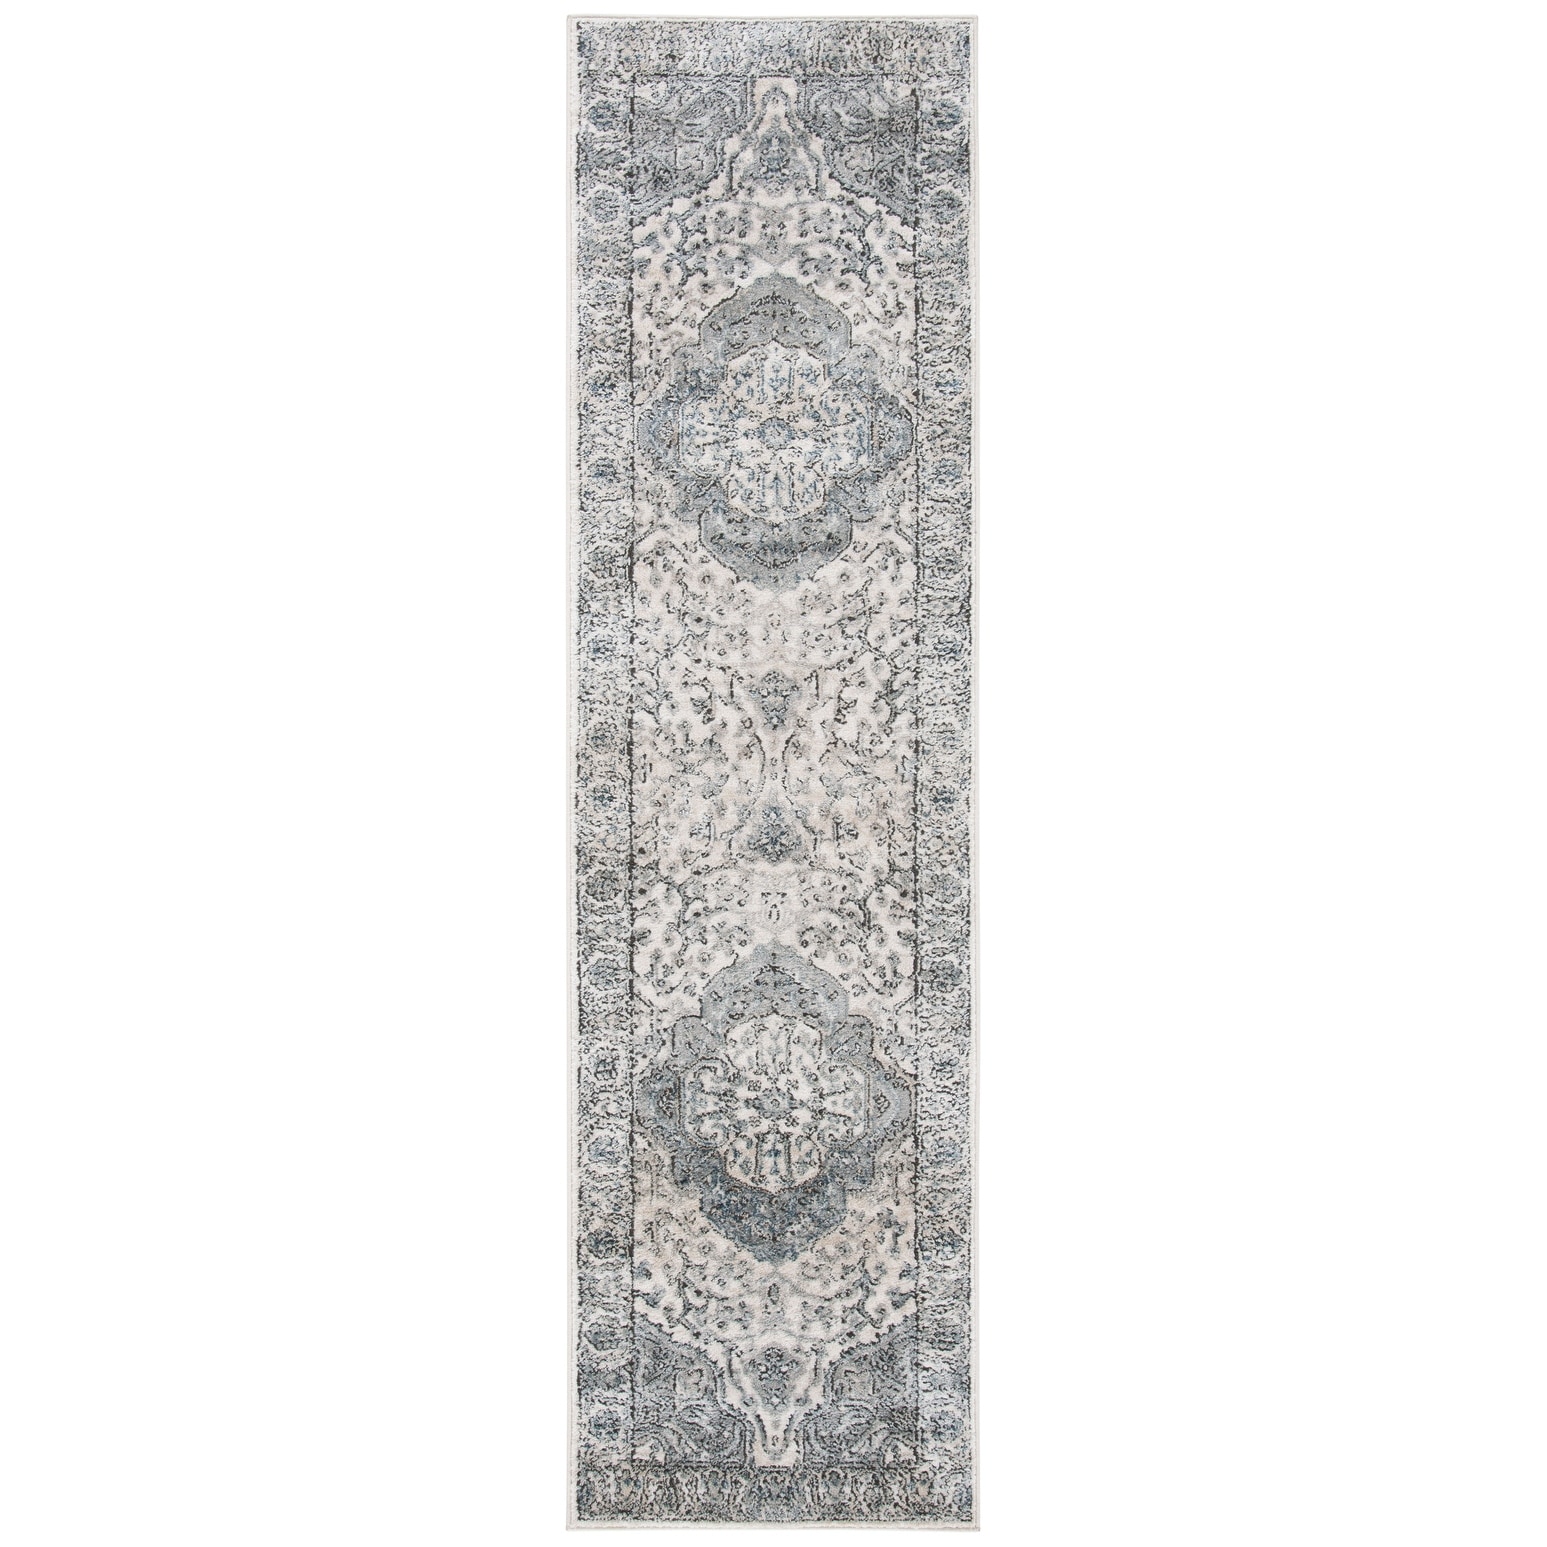 2'2 x 8' Ivory Navy SAFAVIEH Oregon Collection ORE883N Oriental Distressed Non-Shedding Living Room Entryway Foyer Hallway Bedroom Runner 